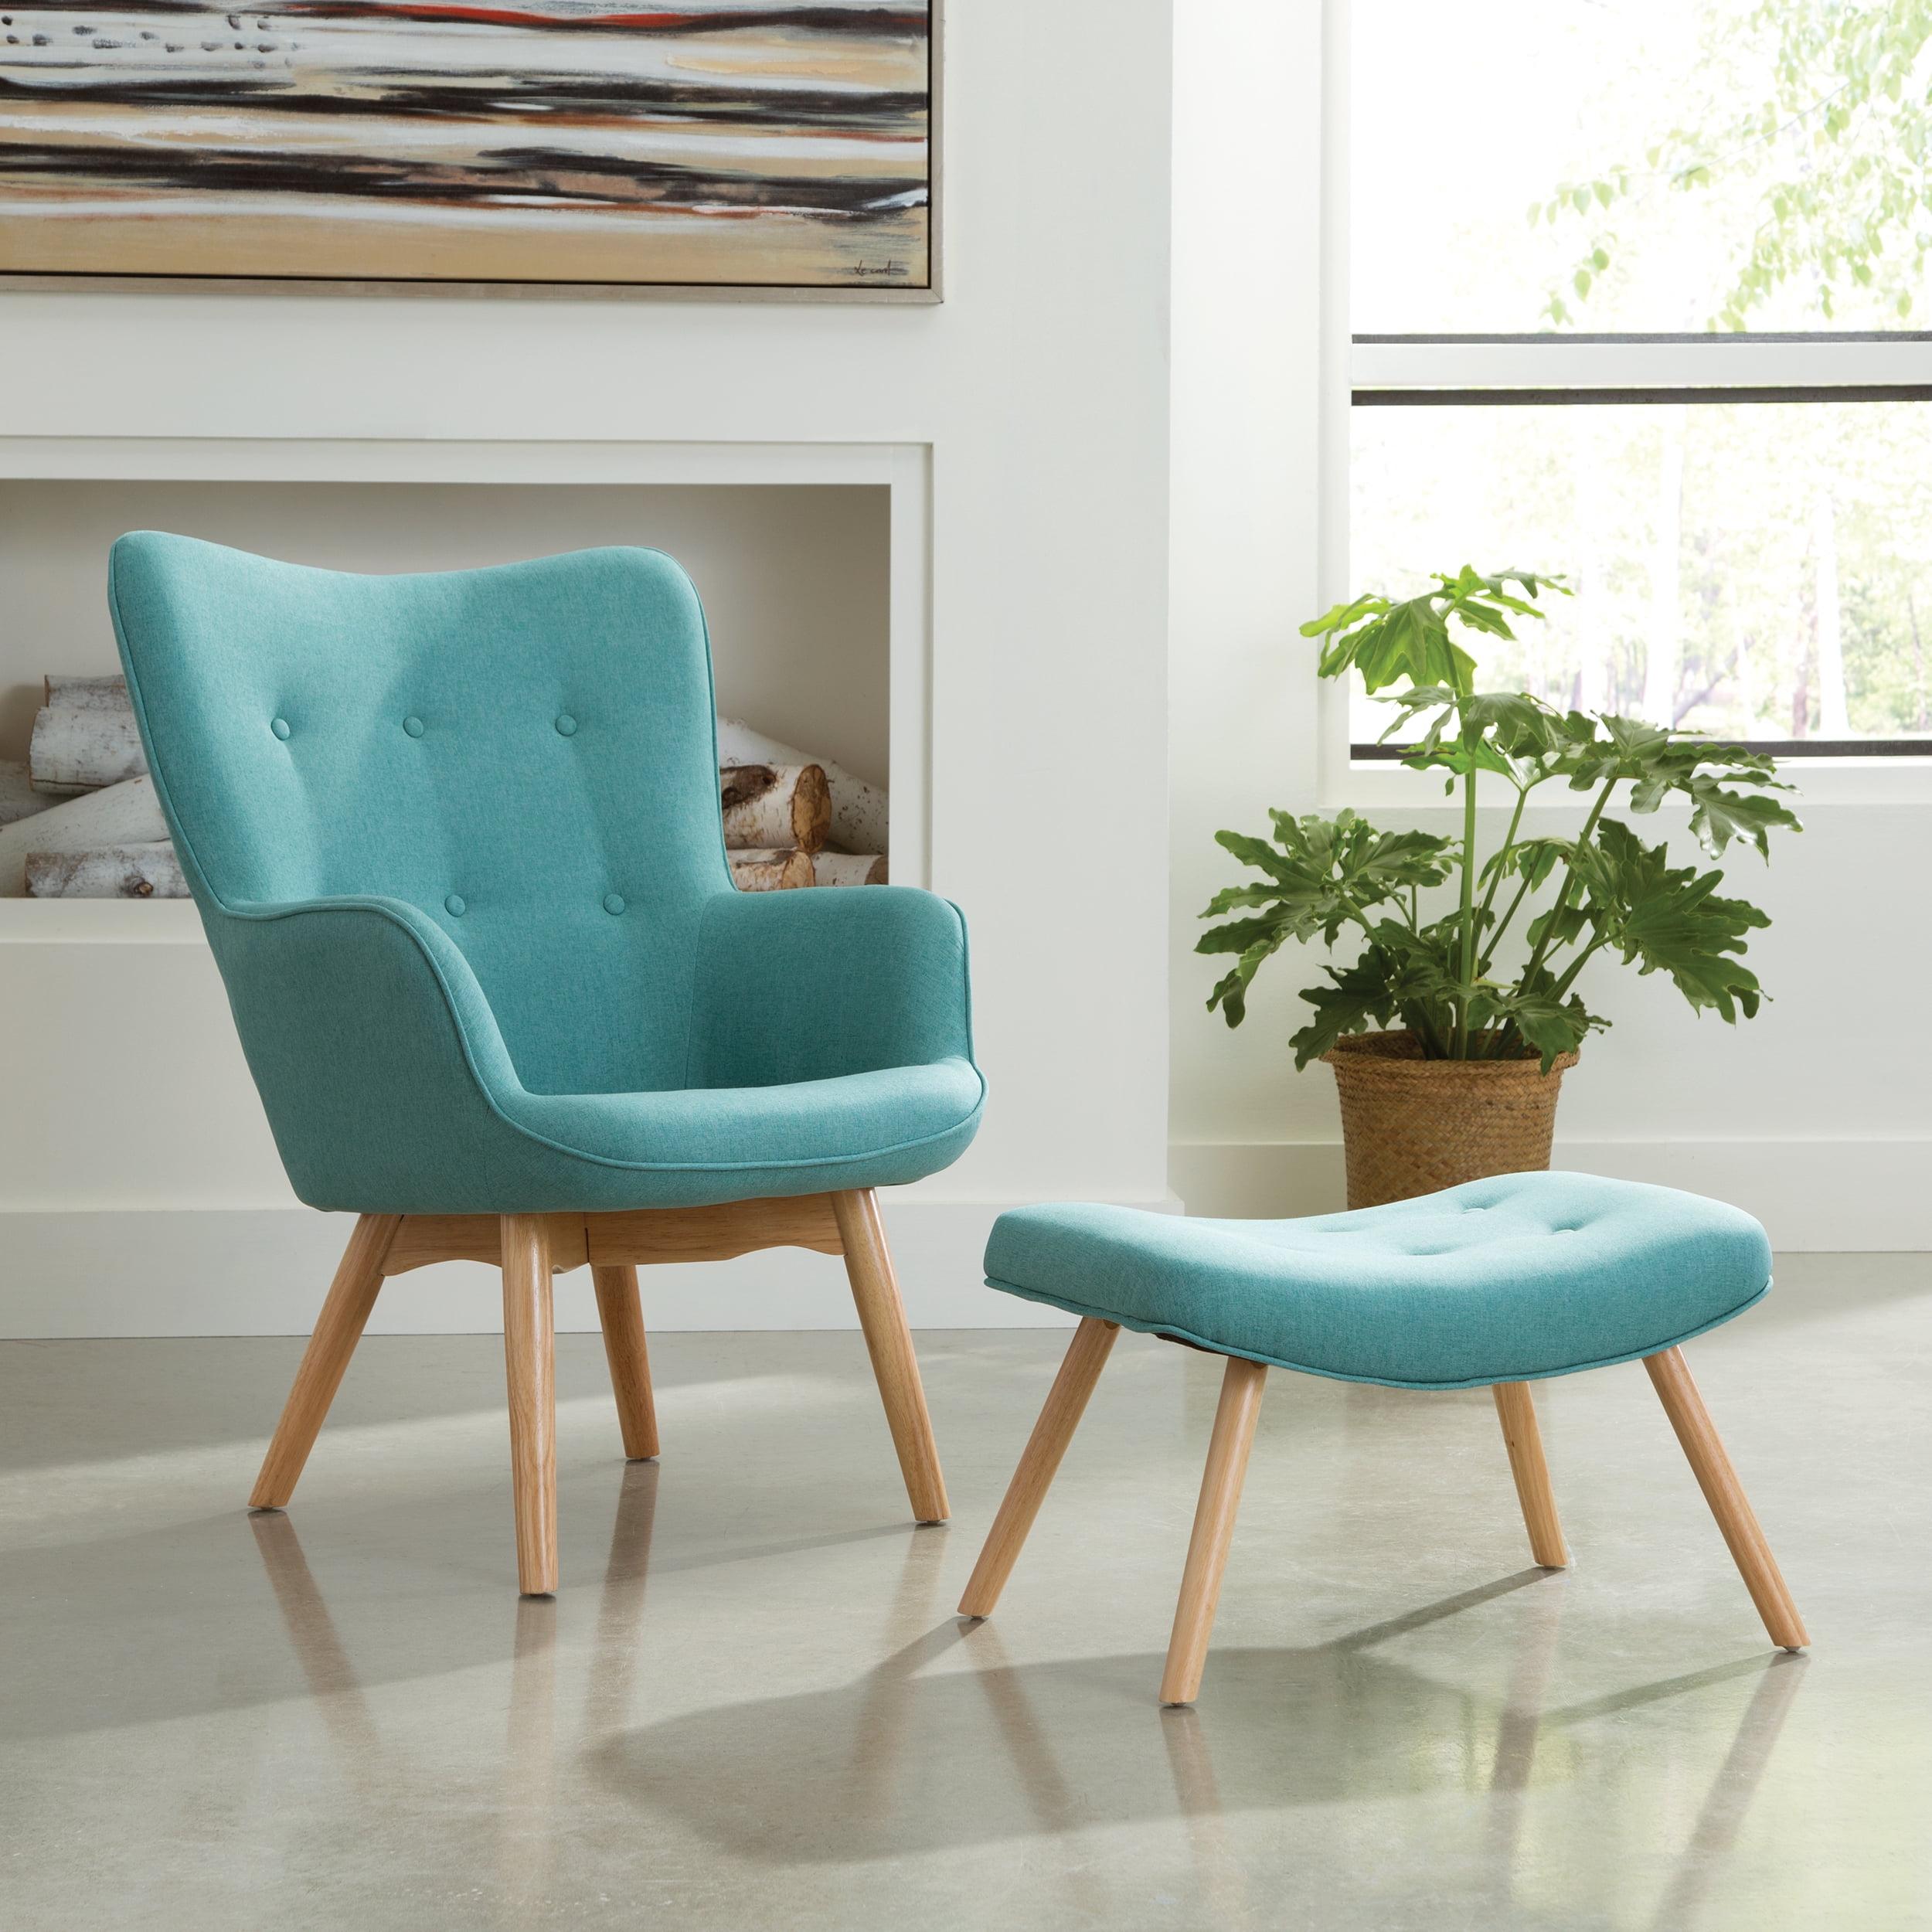 Mid-century modern lounge chair with ottoman